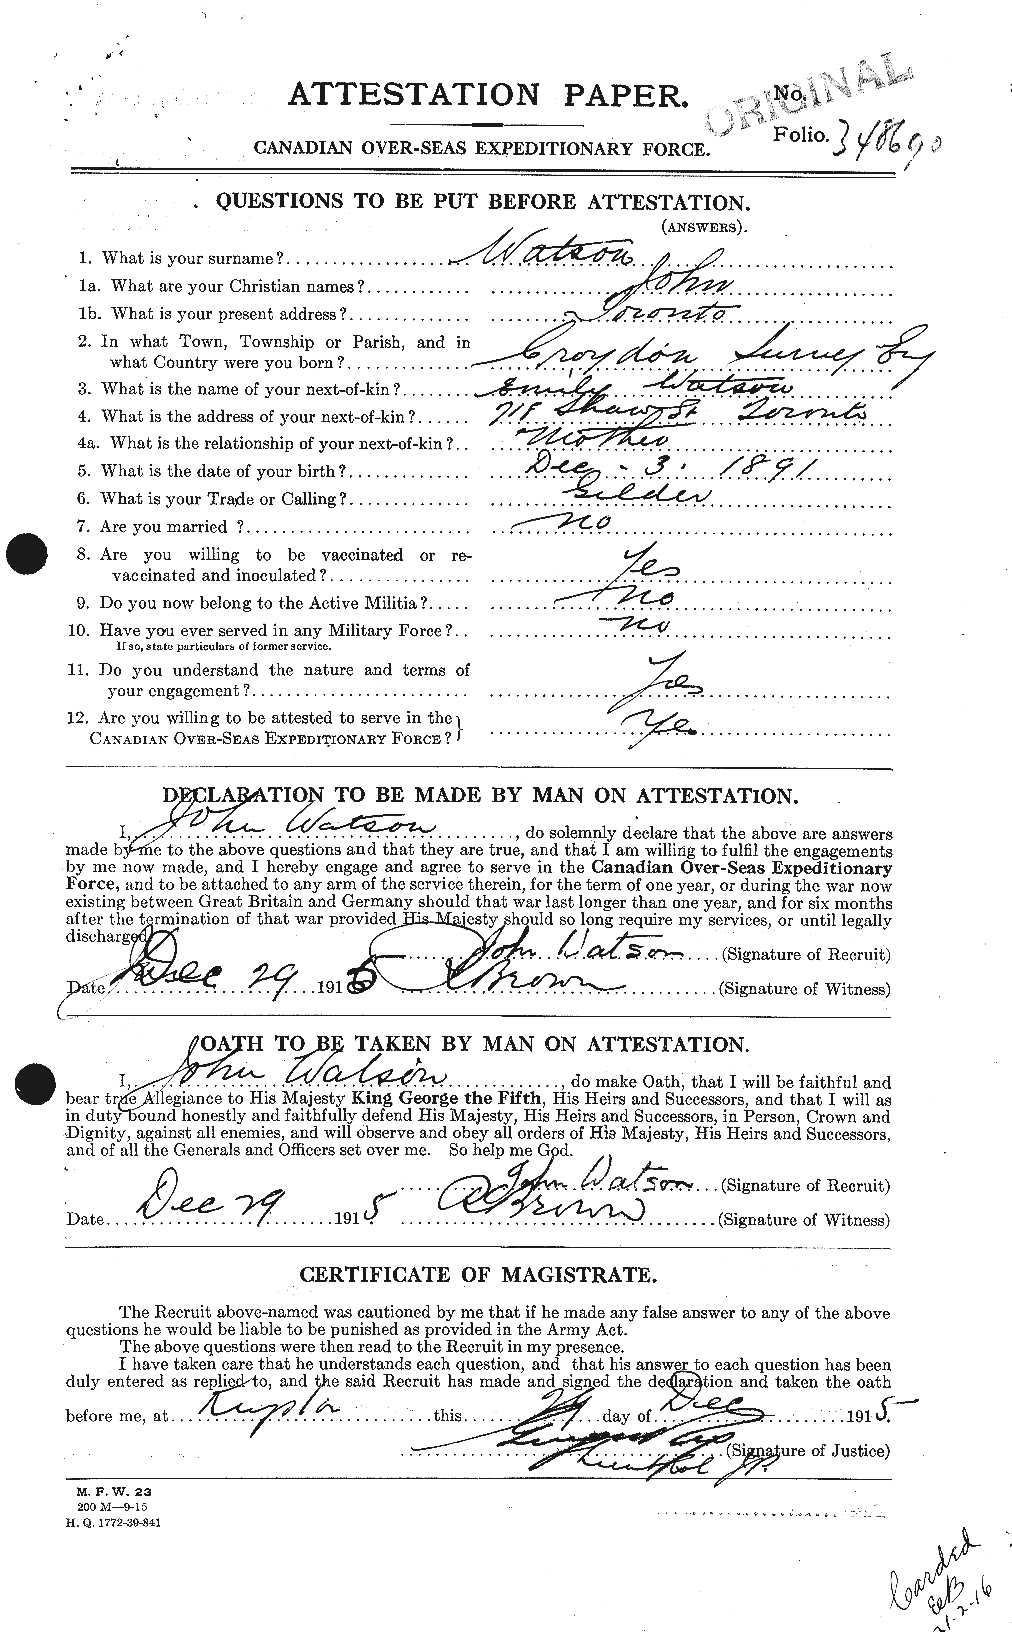 Personnel Records of the First World War - CEF 659003a